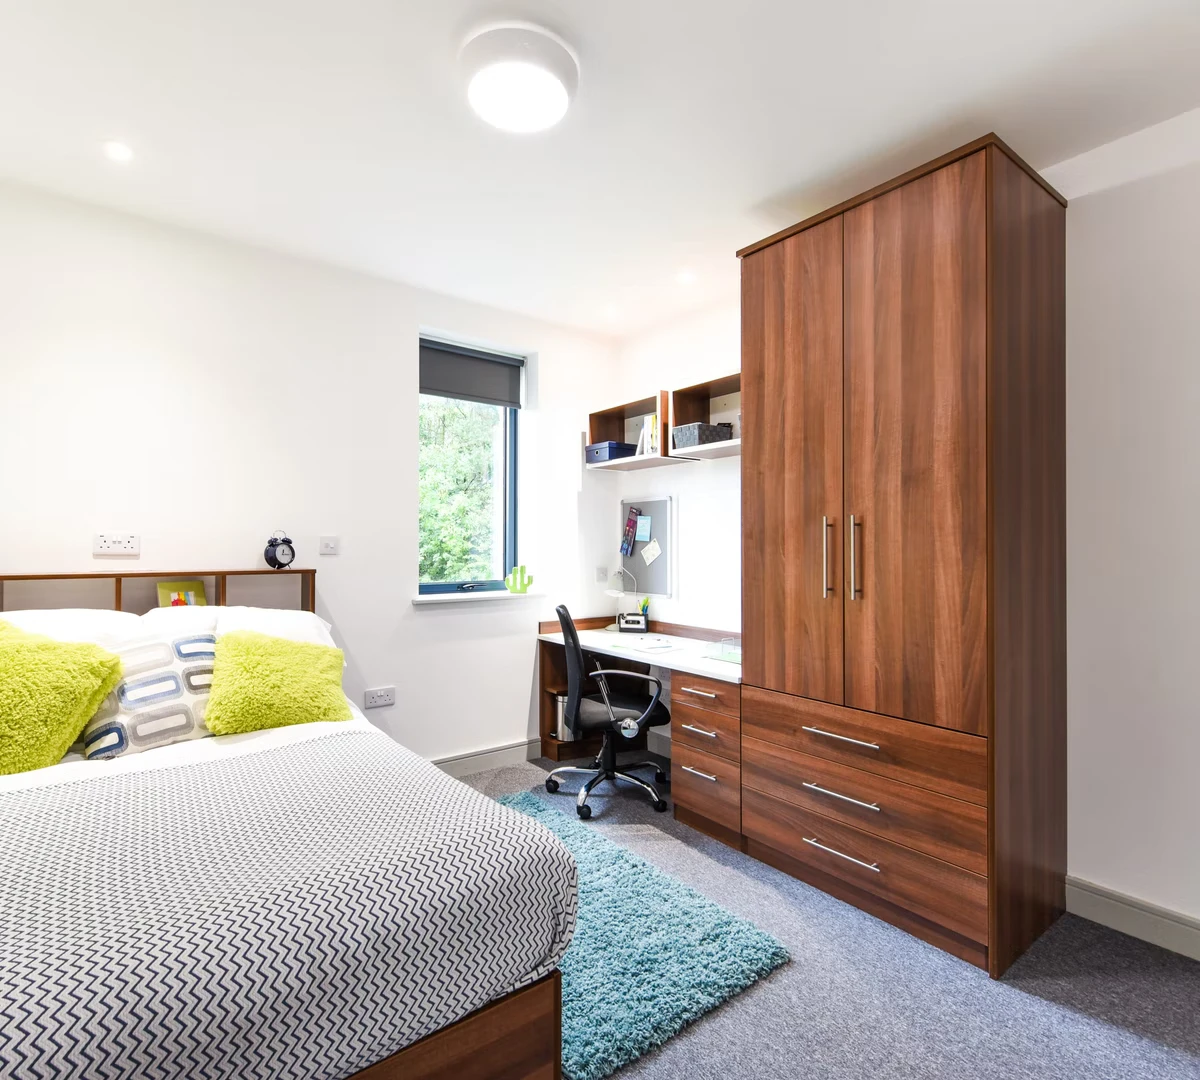 Renting rooms by the month in Durham